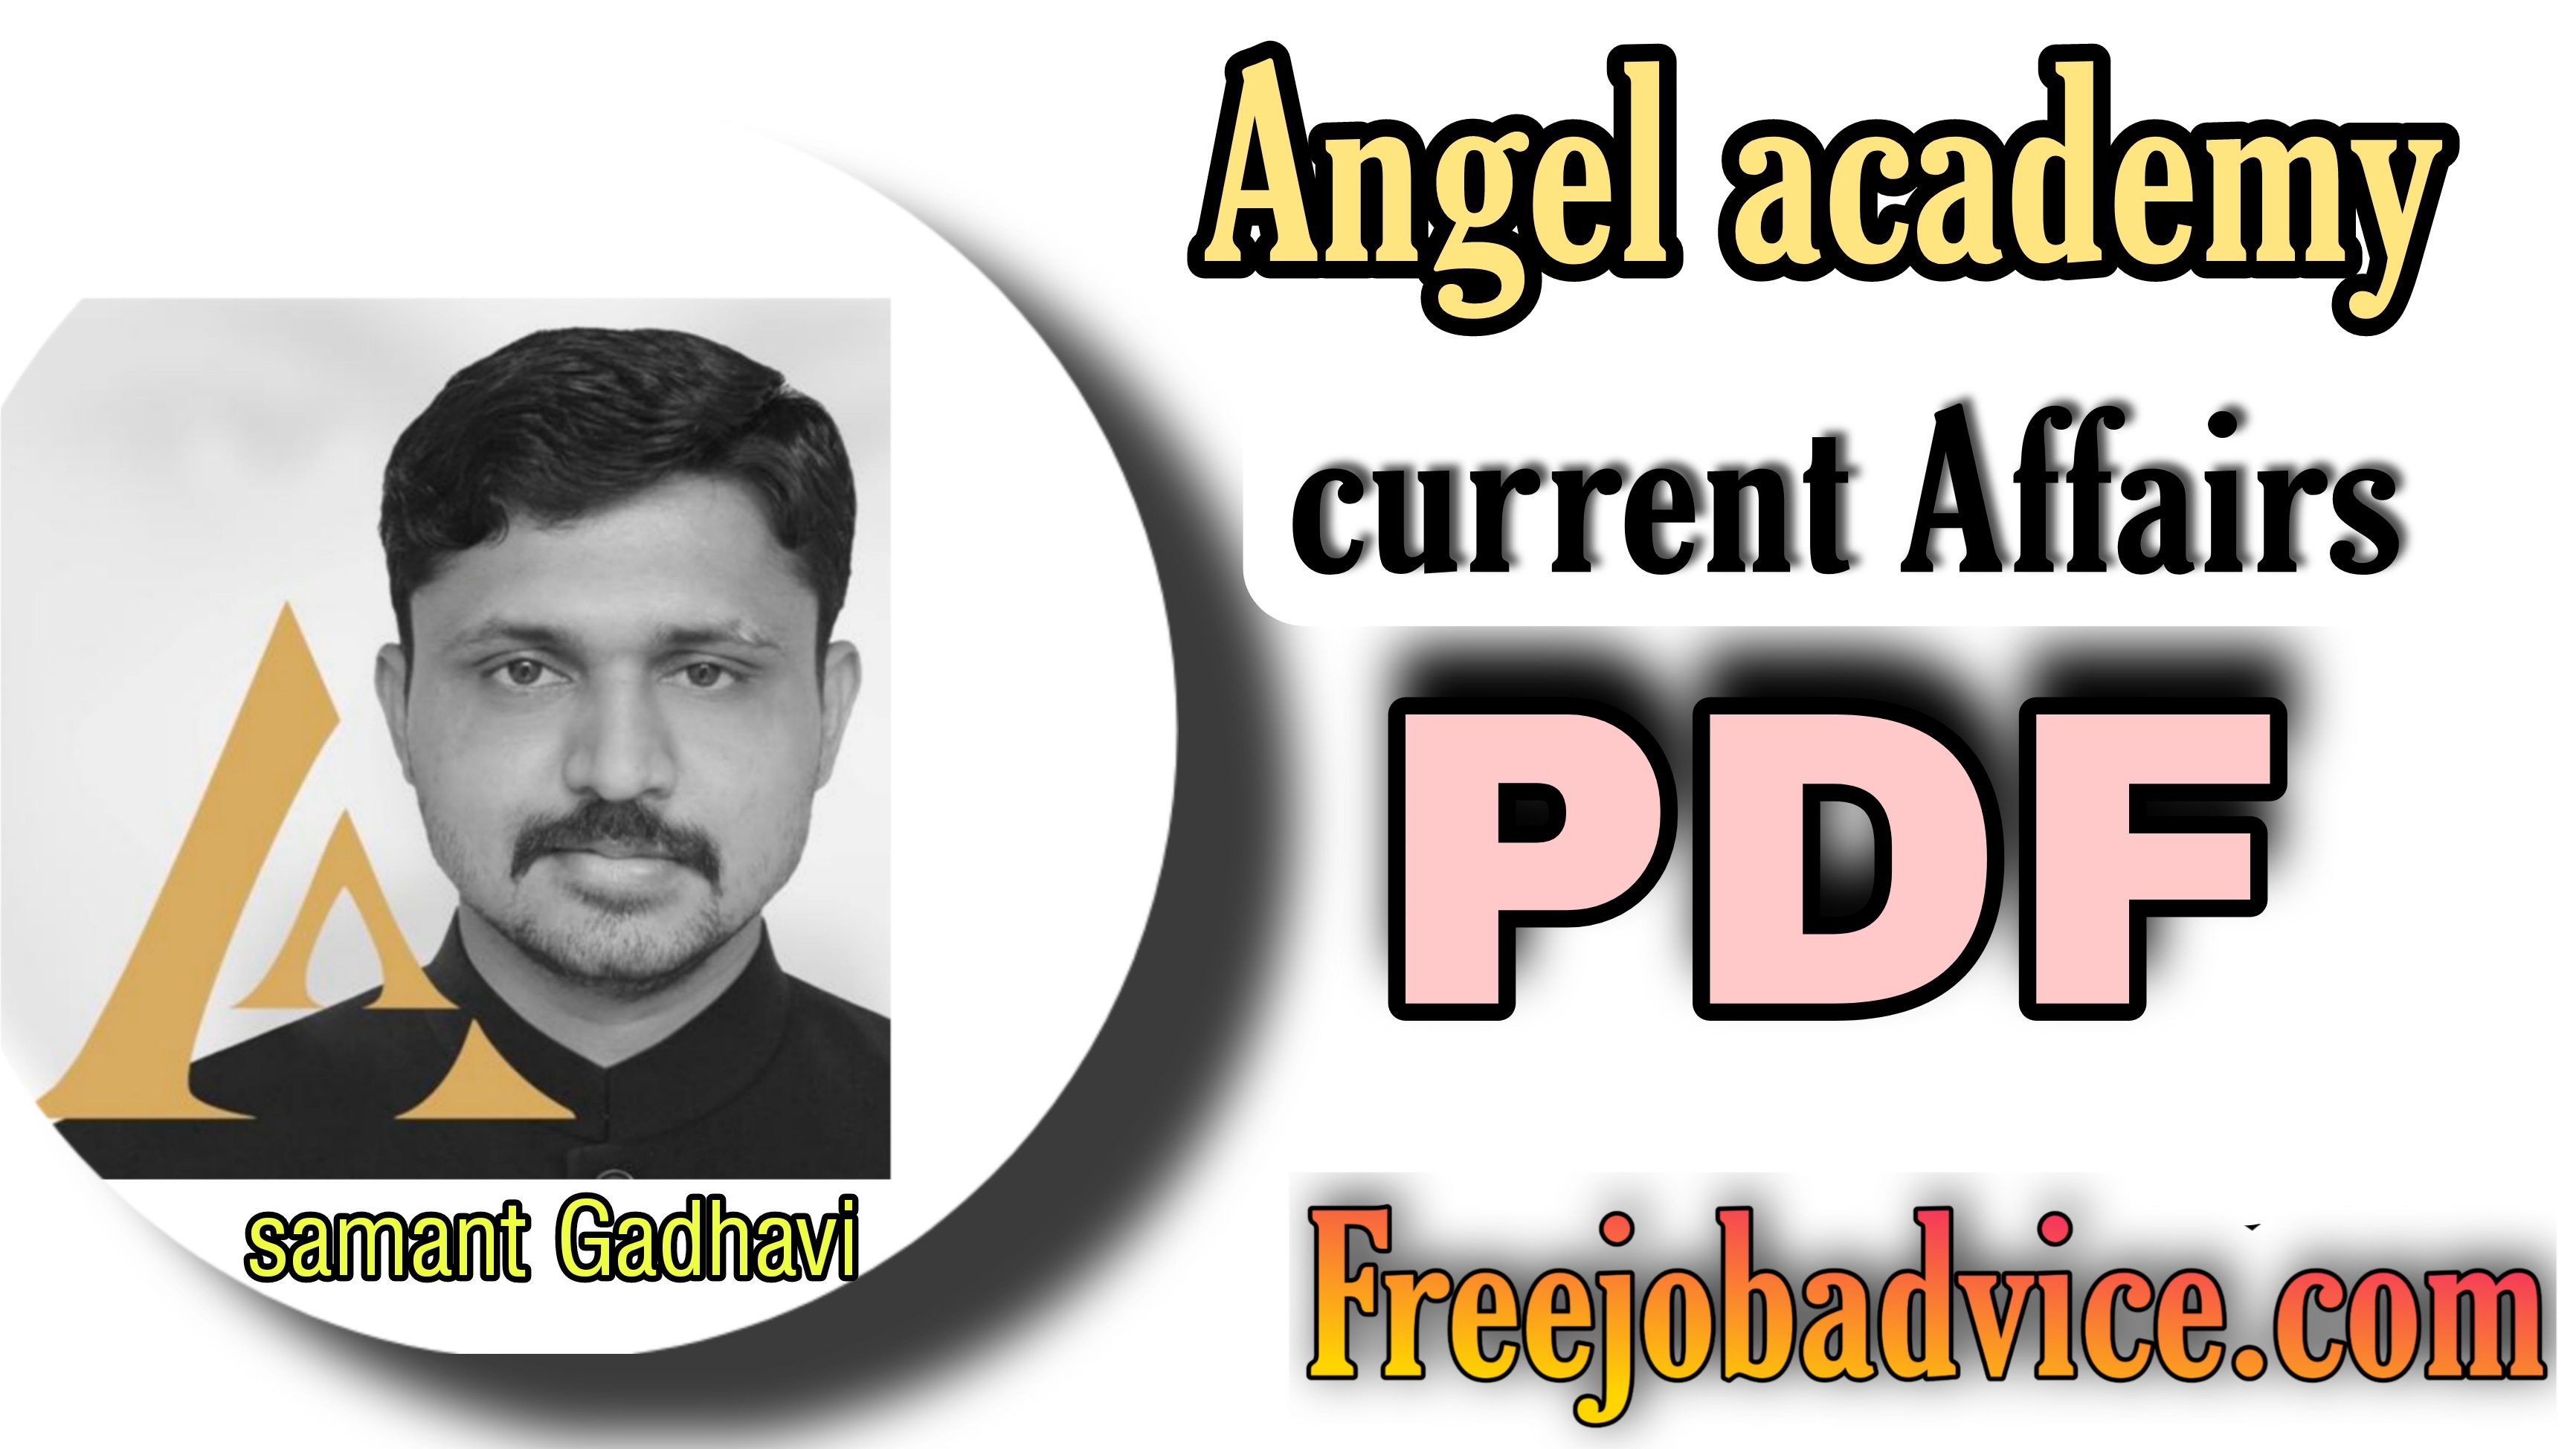 Angel Academy Current Affairs 2022  Follow some steps to download Angel Academy current Affairs 2022,  follow the instructions below to download pdf and download angel academy current affairs pdf carefully